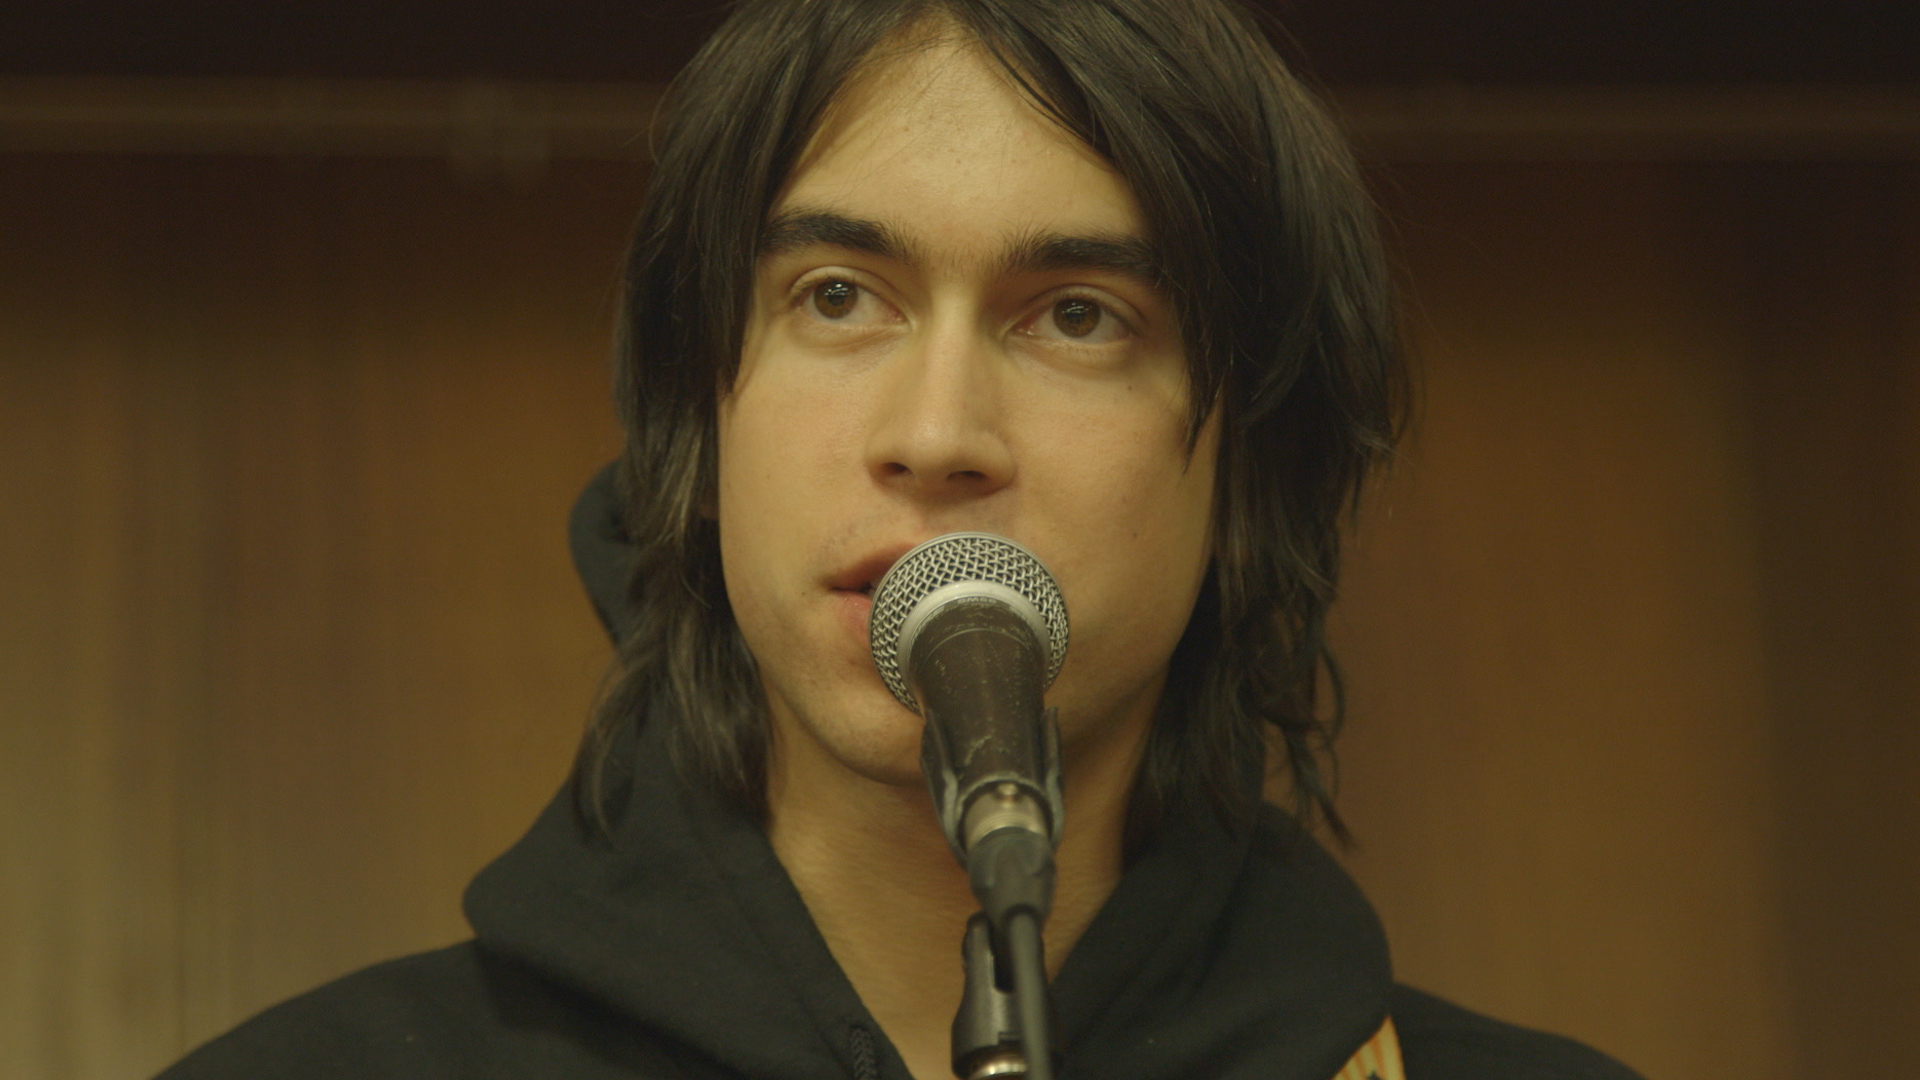 Alex G Opens Up About How He Gained Momentum As a Young Musician - VICE  Video: Documentaries, Films, News Videos